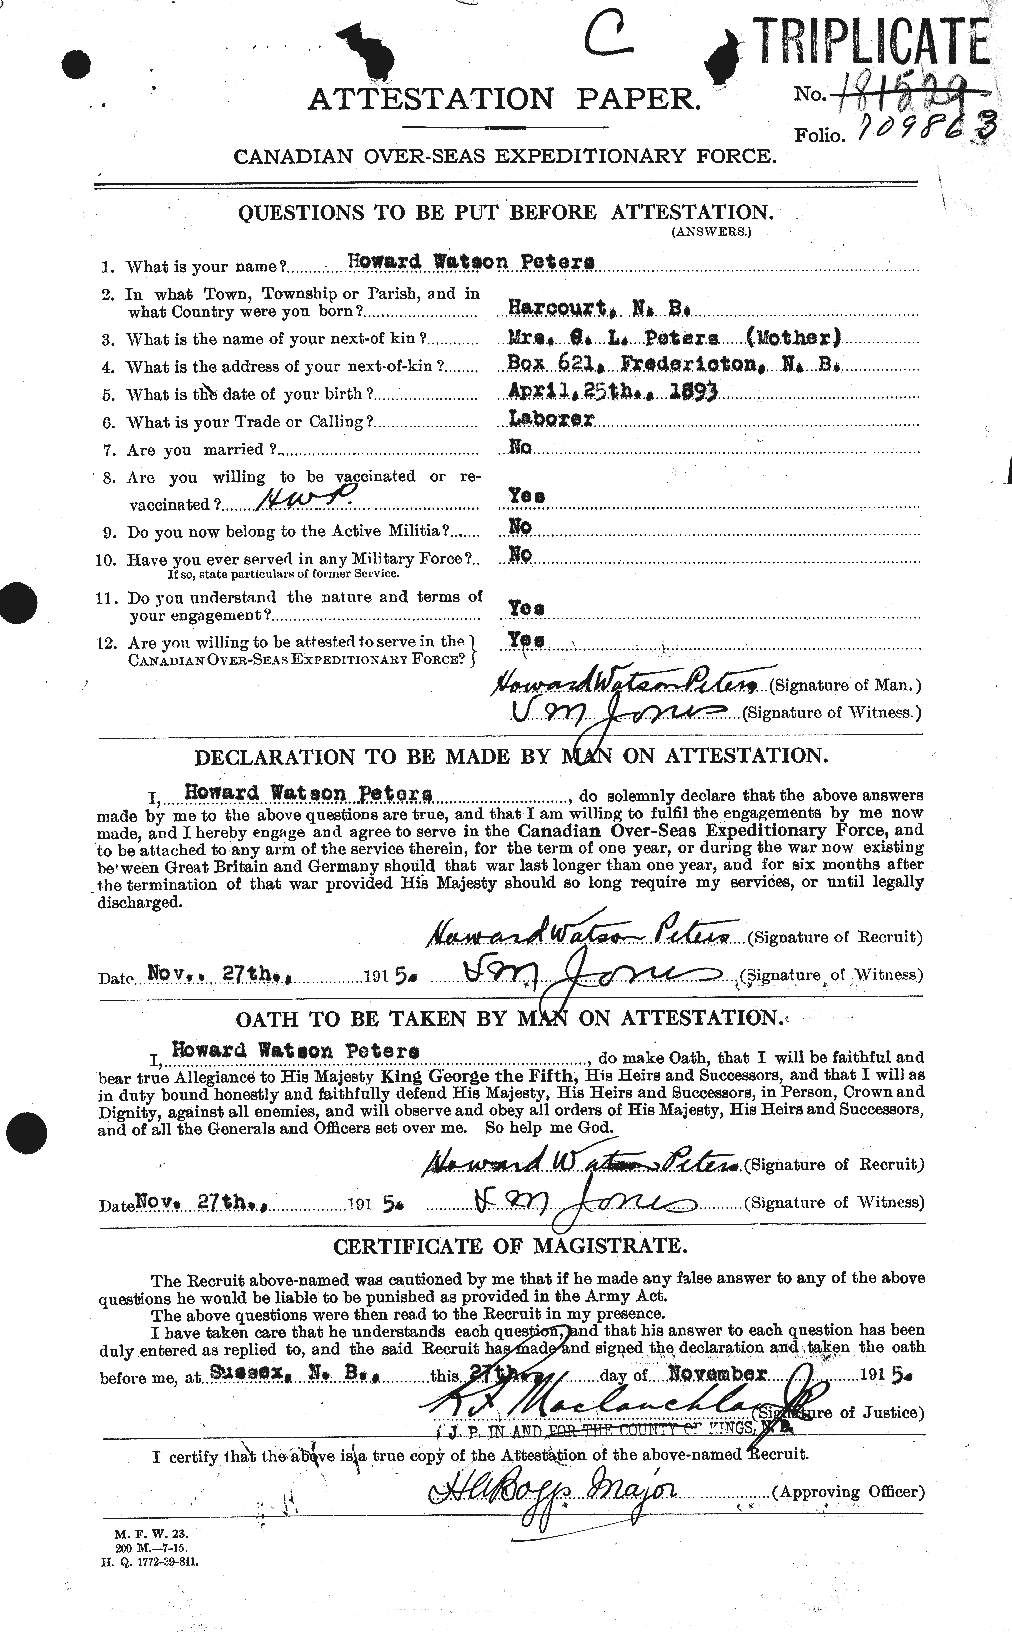 Personnel Records of the First World War - CEF 575505a